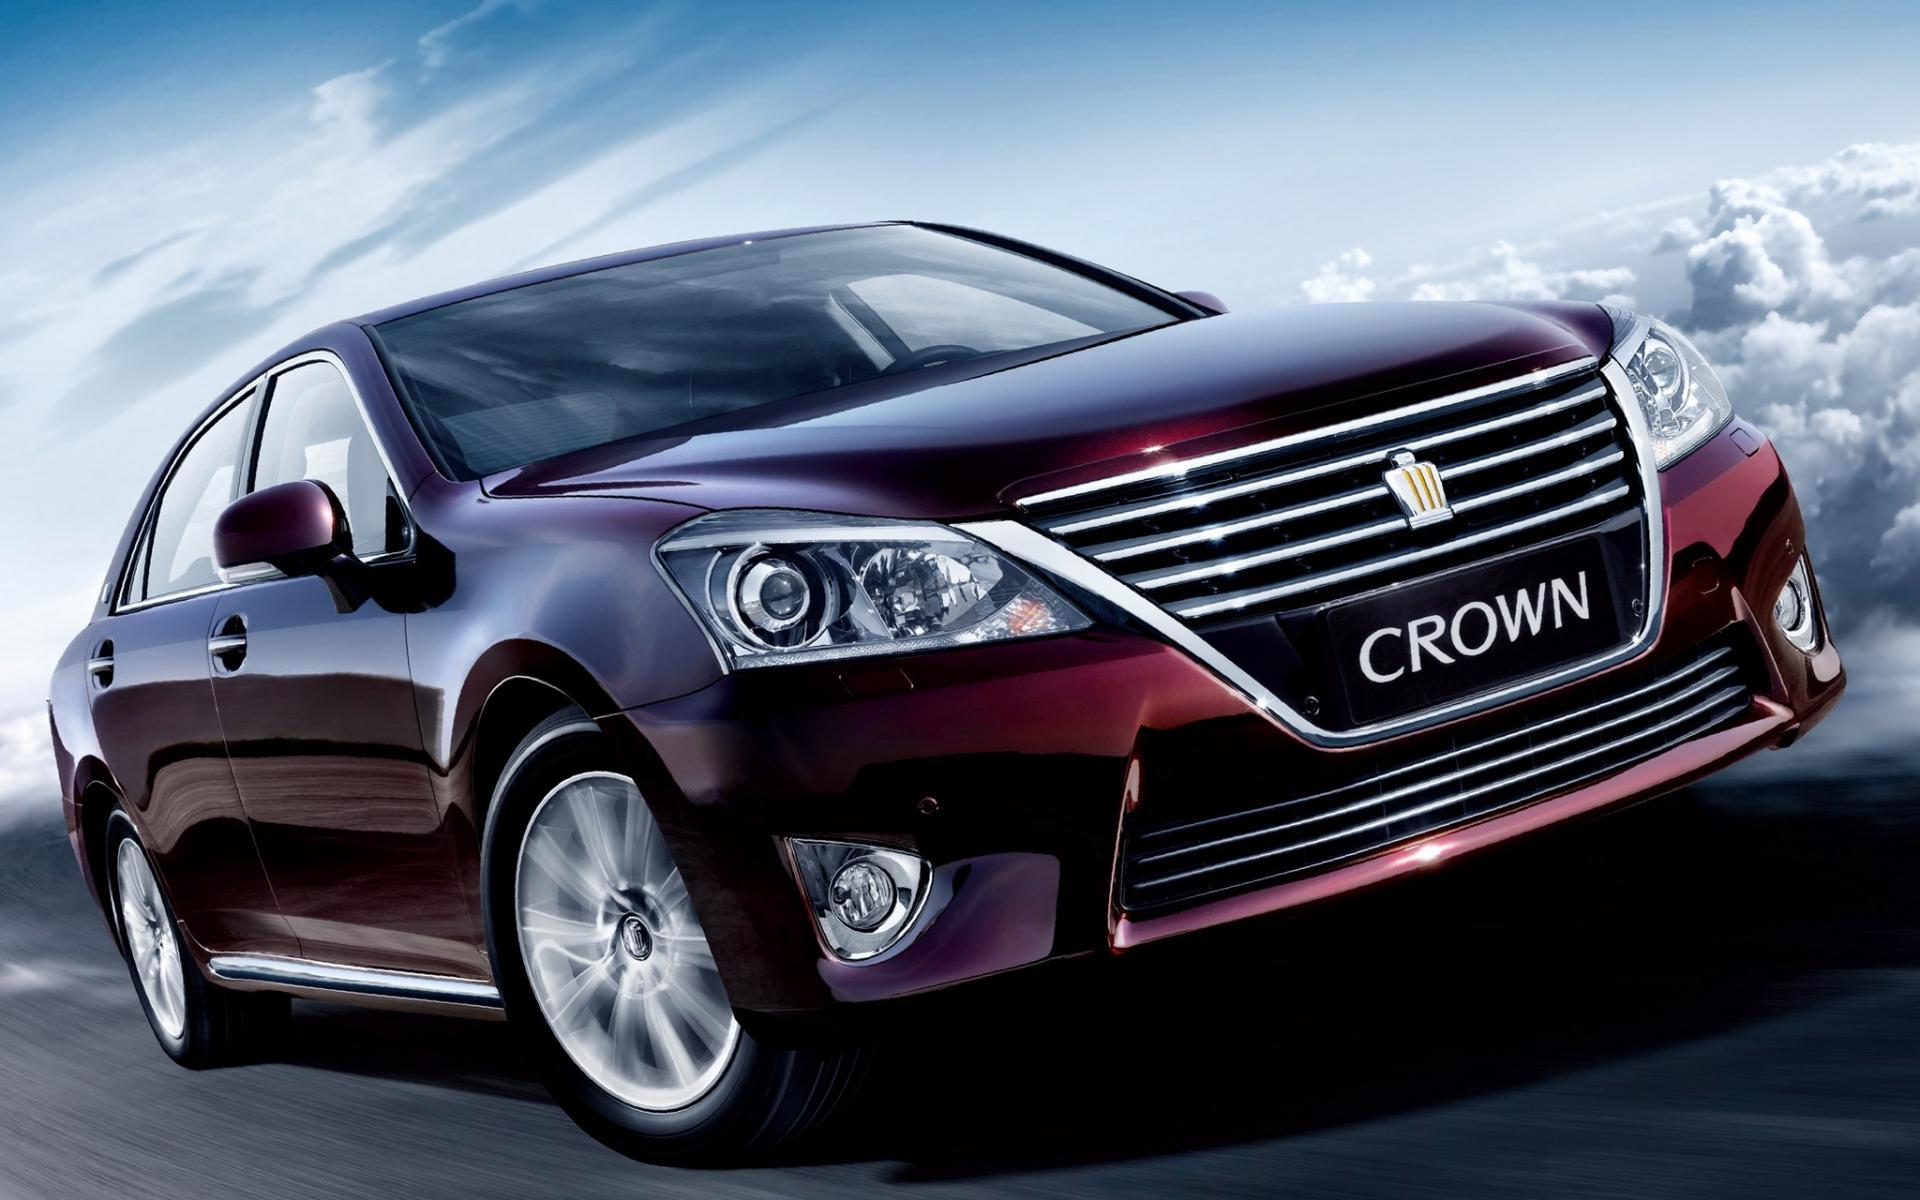 Toyota Crown Hd Wallpapers ✓ Labzada Wallpapers.